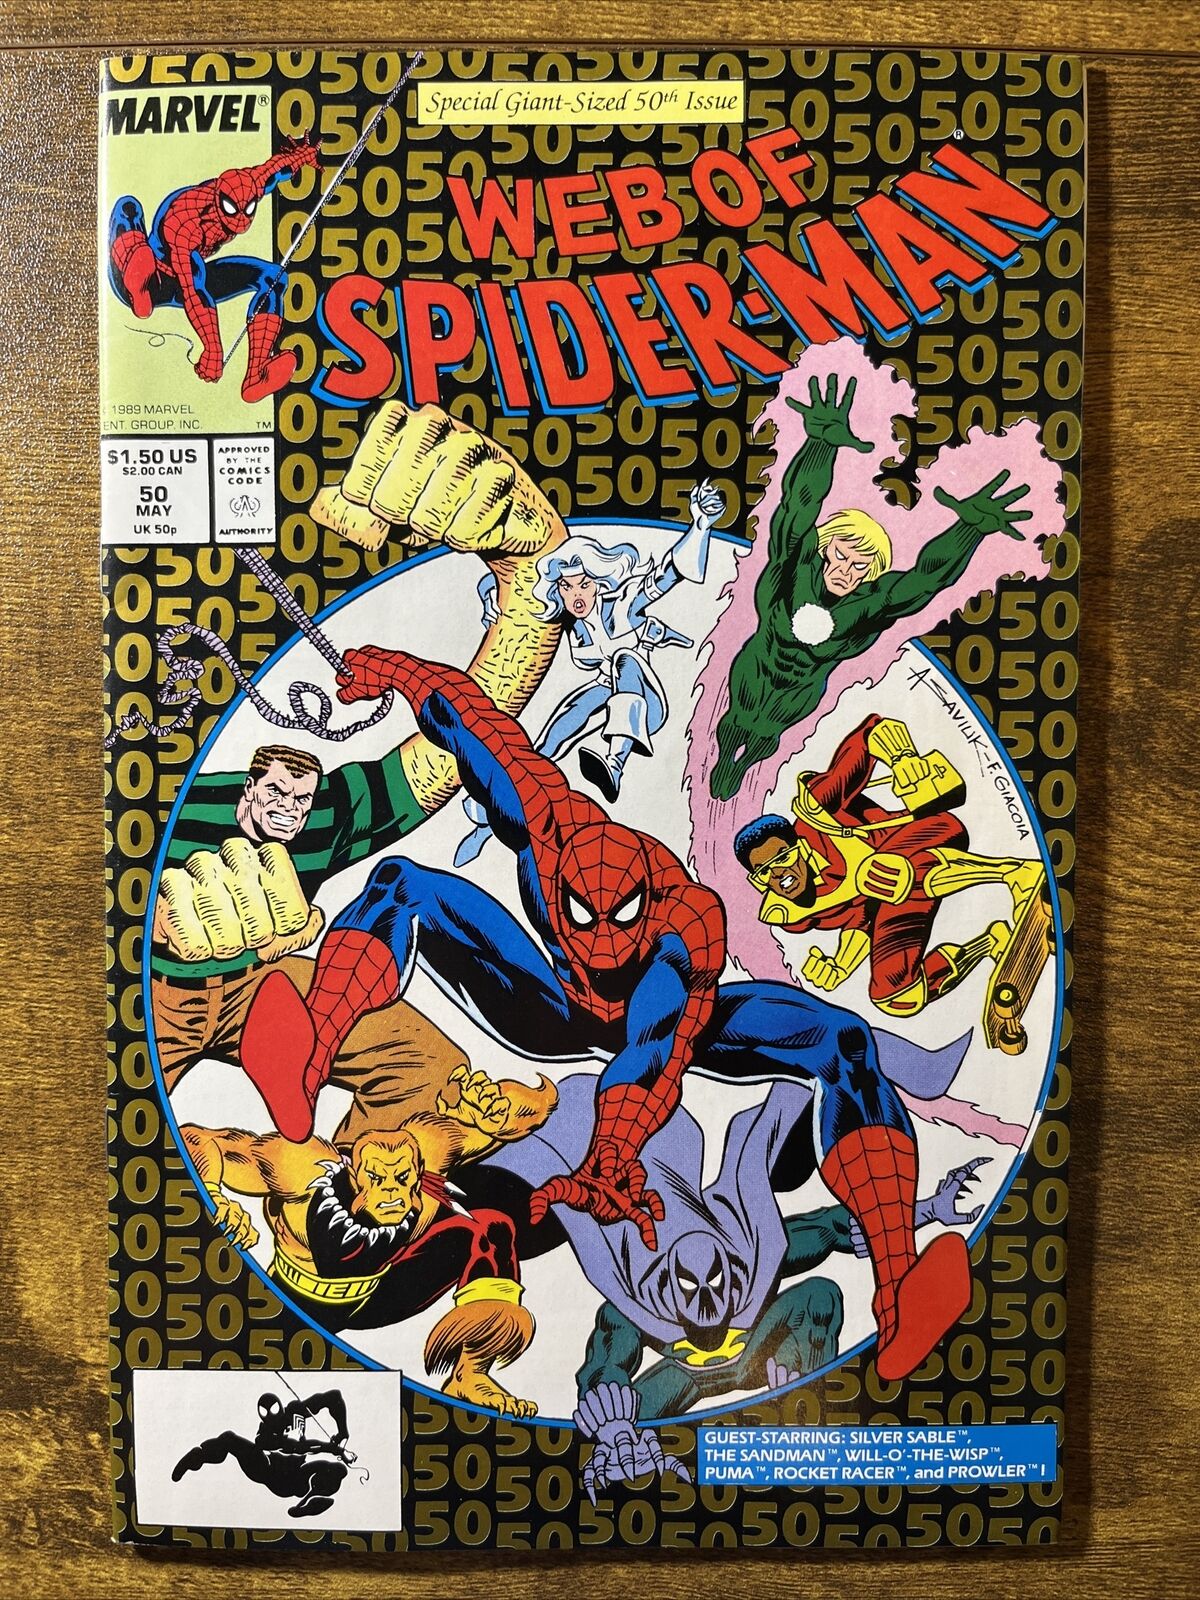 WEB OF SPIDER-MAN 50 DIRECT EDITION GERRY CONWAY STORY MARVEL COMICS 1989